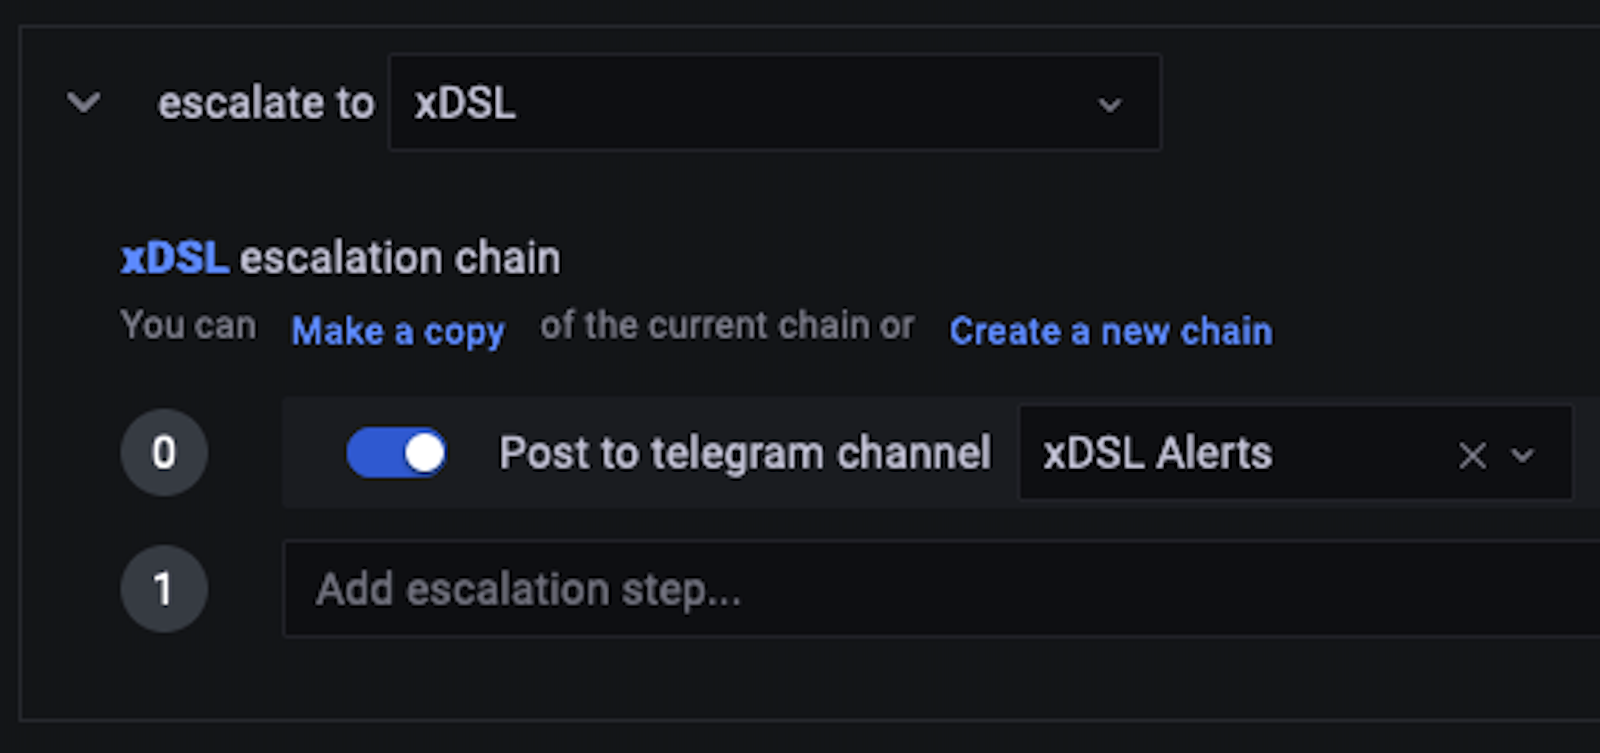 A screenshot showing Telegram being added to an escalation in Grafana OnCall.